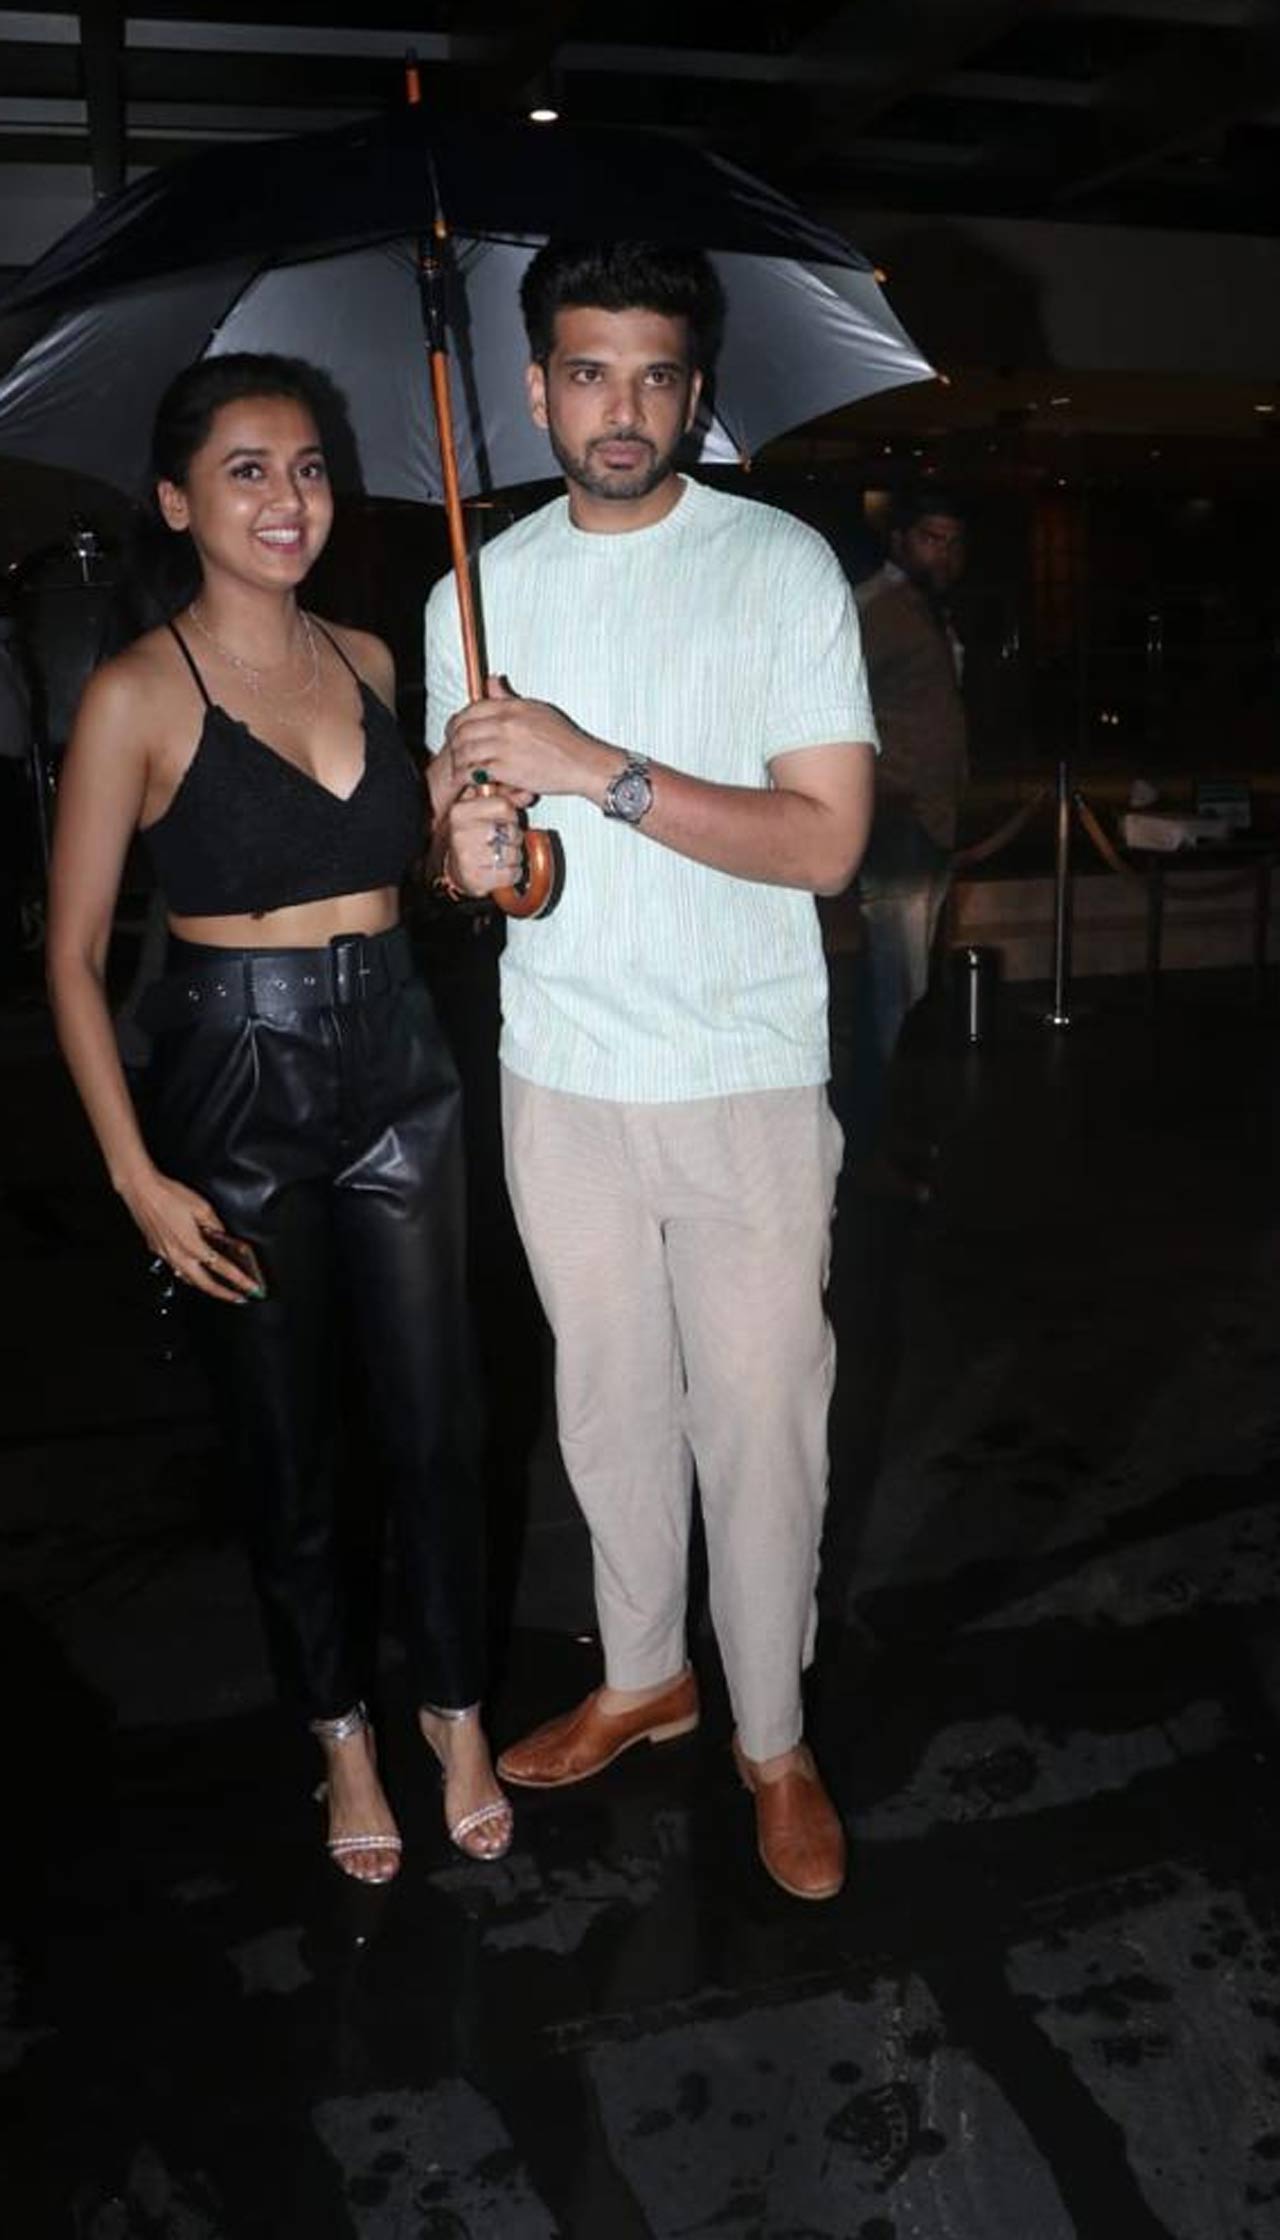 Tejasswi Prakash, Karan Kundrra hold an umbrella as the Monsoon showers have now arrrived in Mumbai and Goa. Speaking about her training in dance, the actress had told mid-day.com, 